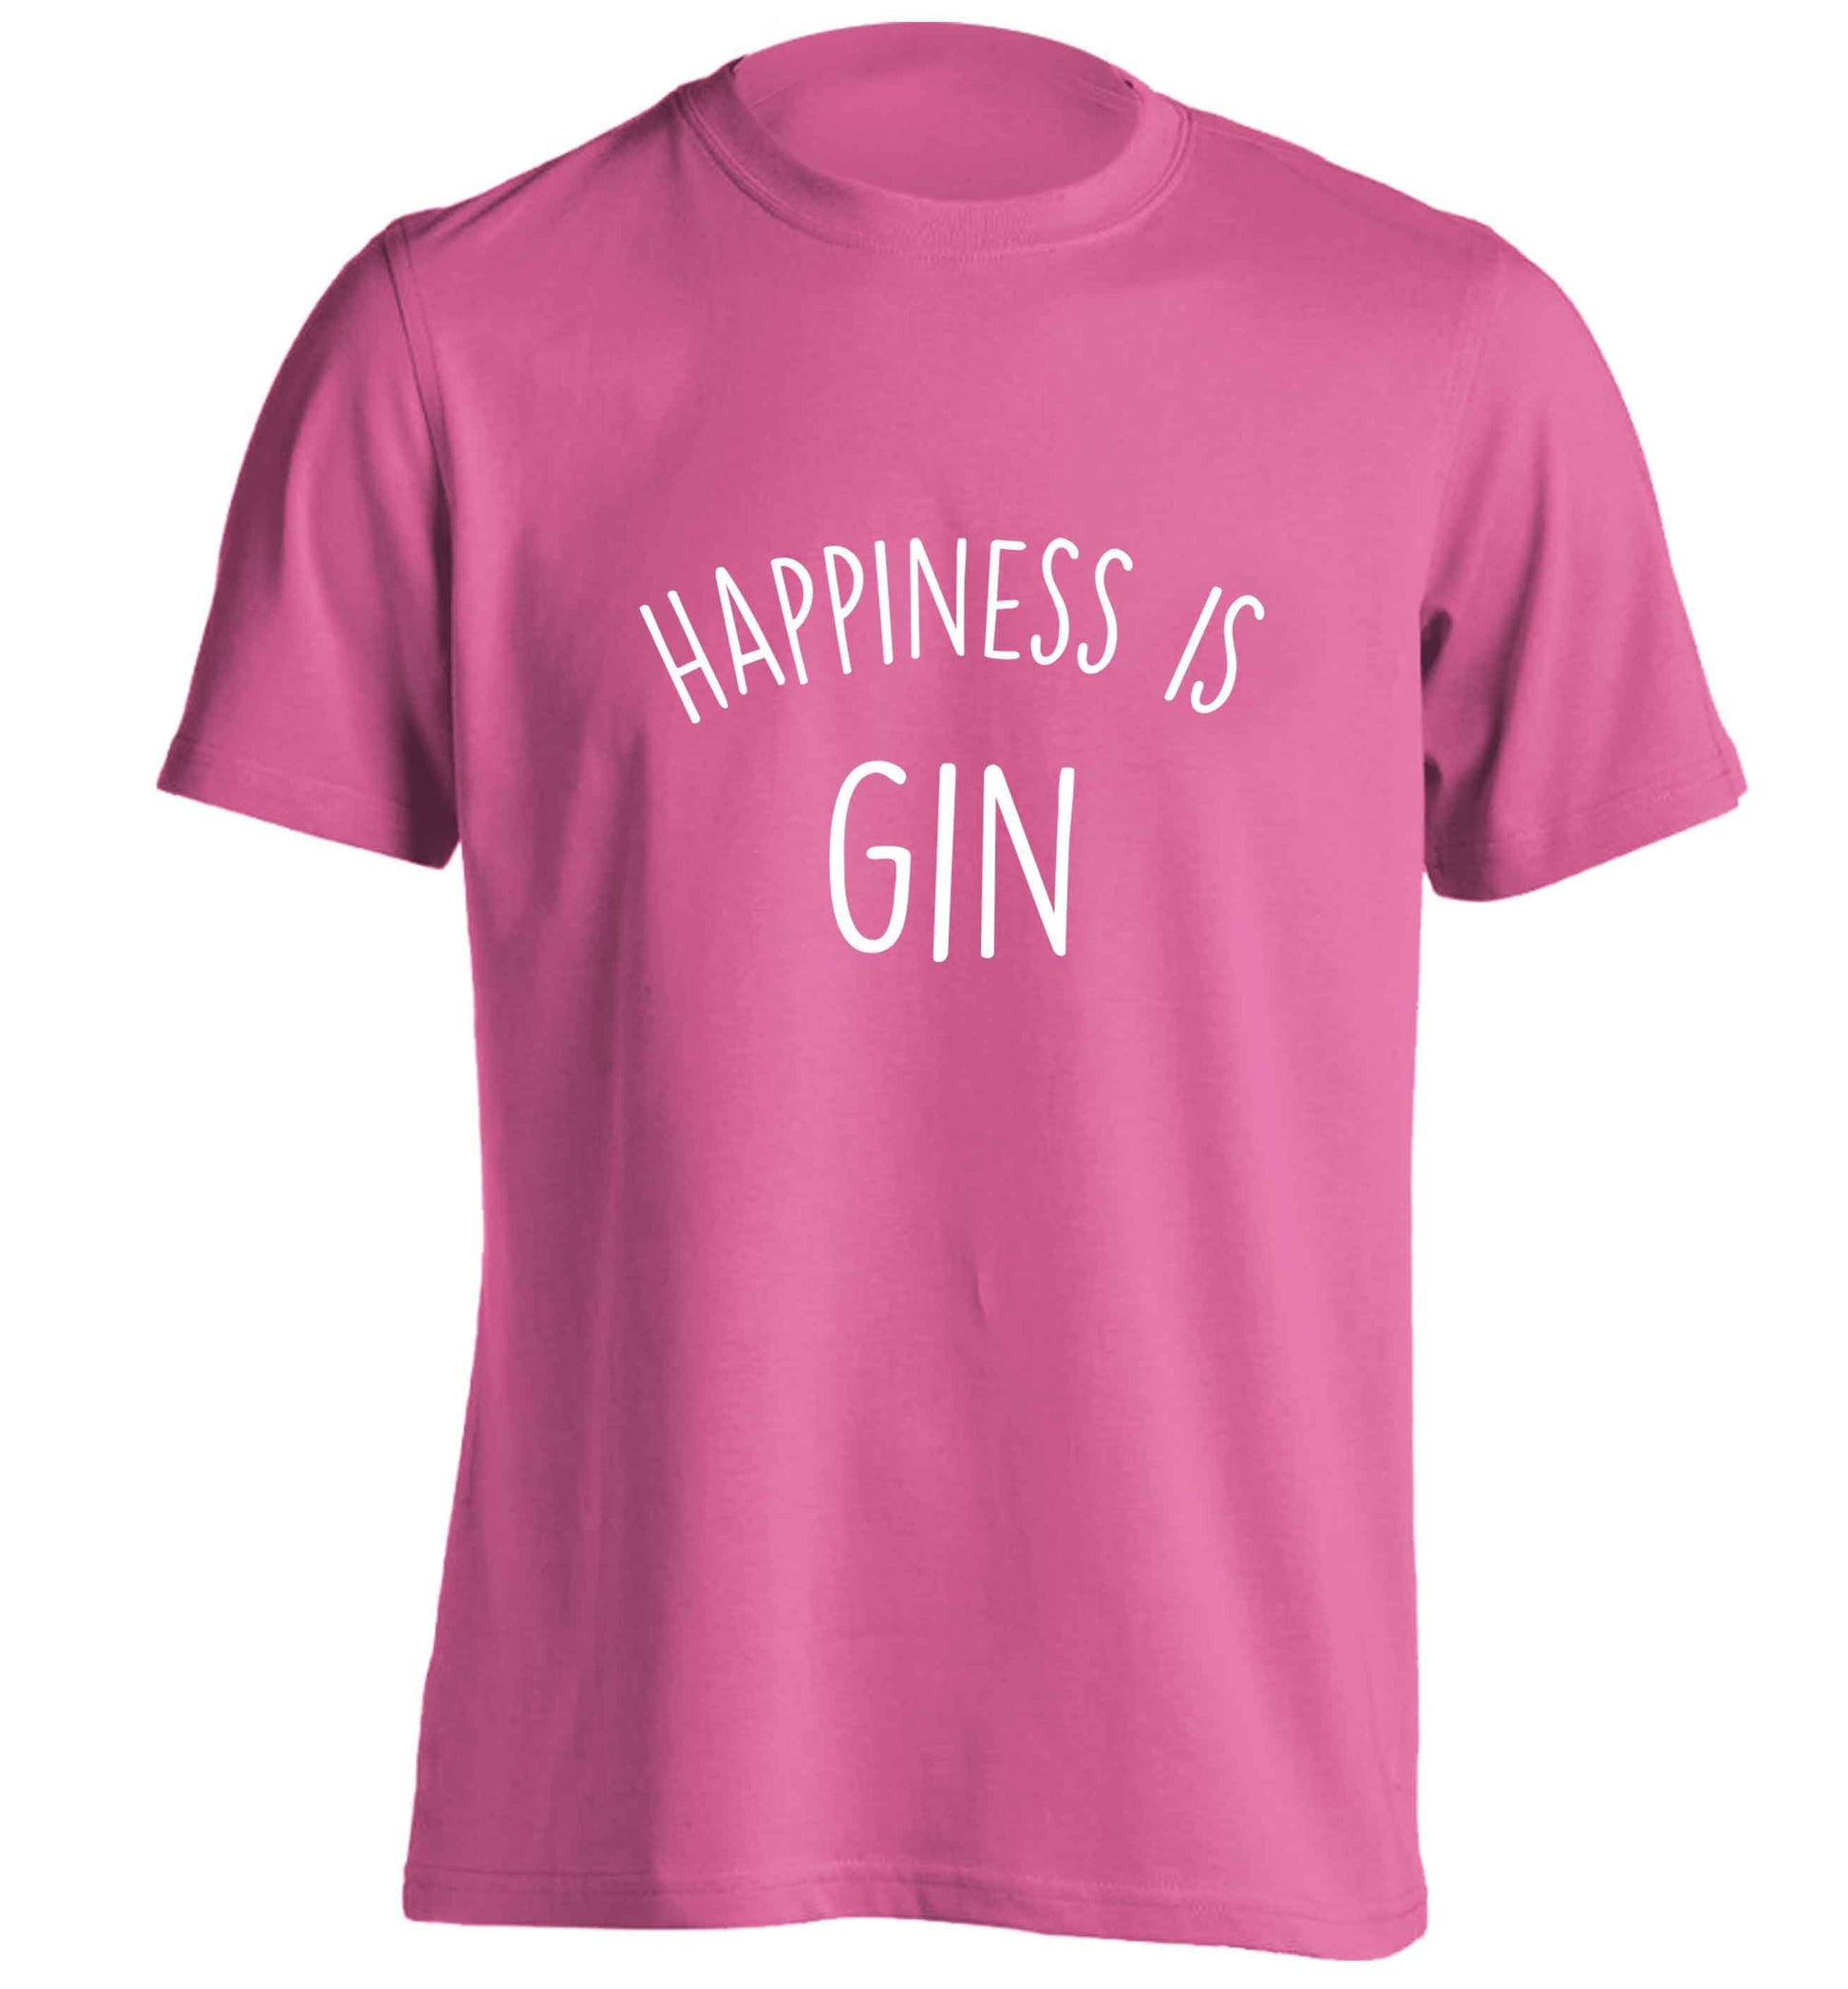 Happiness is gin adults unisex pink Tshirt 2XL